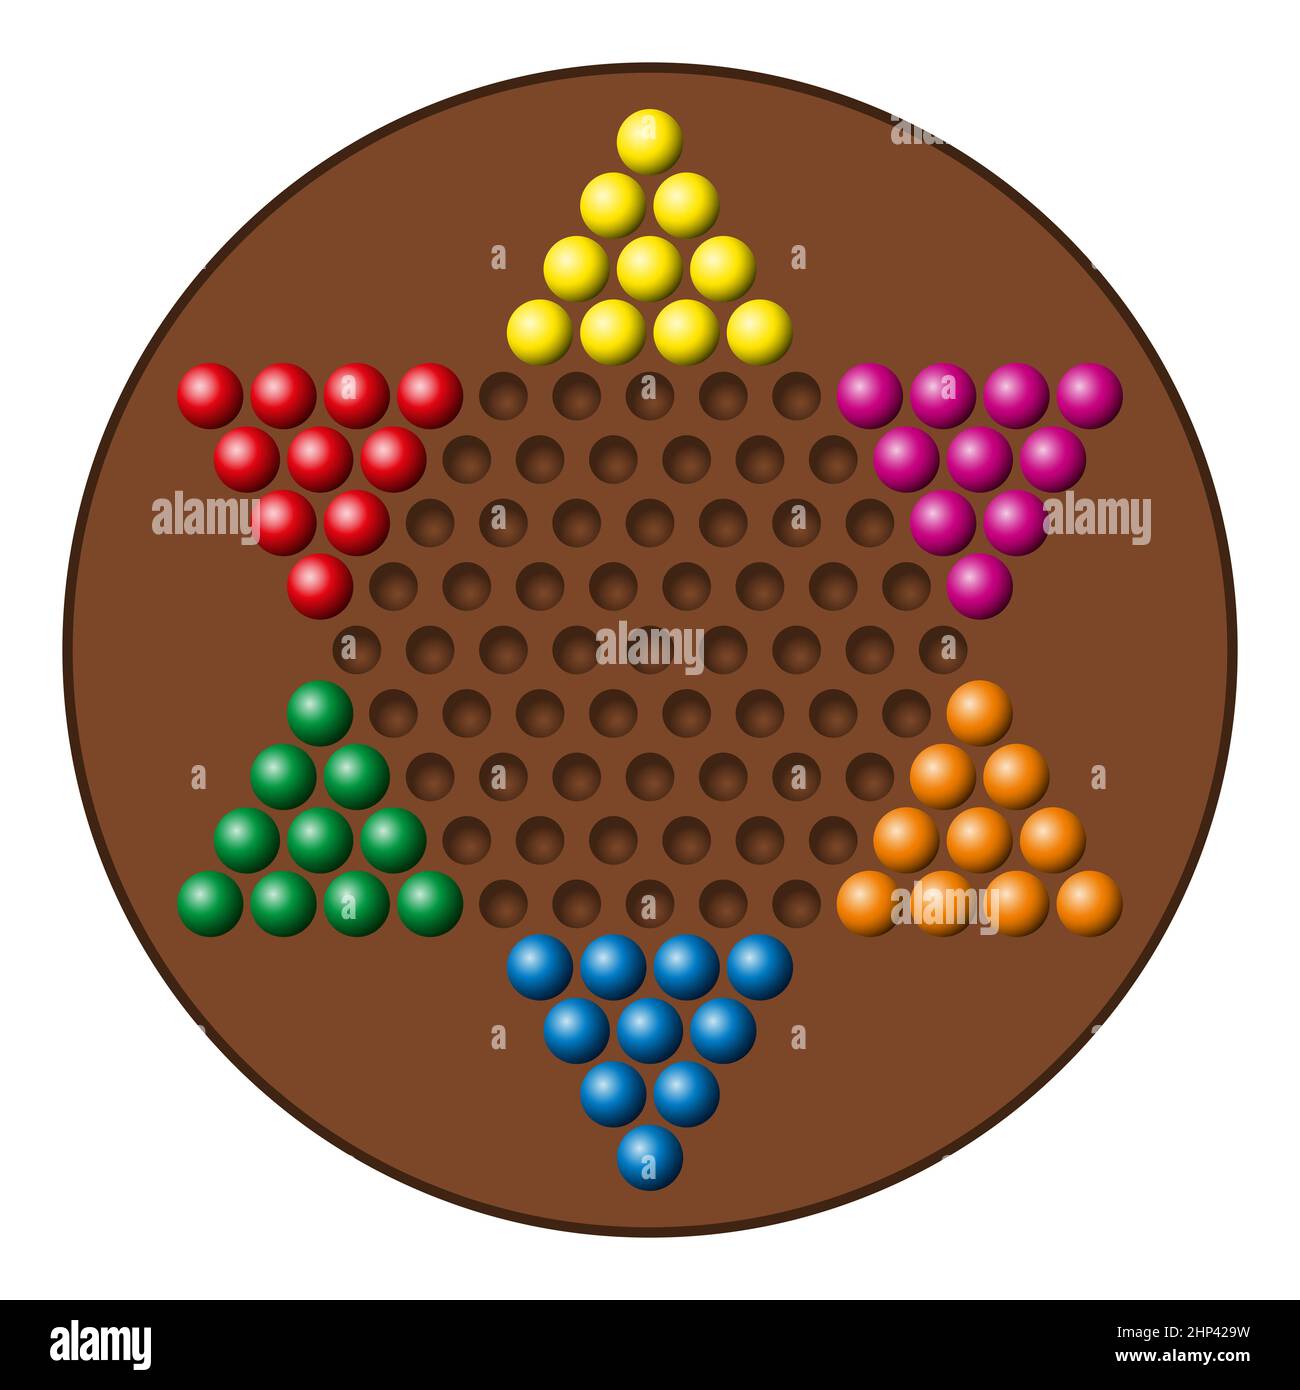 Chinese checkers game board, with rainbow colored marbles. Also known as sternhalma, or Chinese chequers. A strategy board game of German origin. Stock Photo